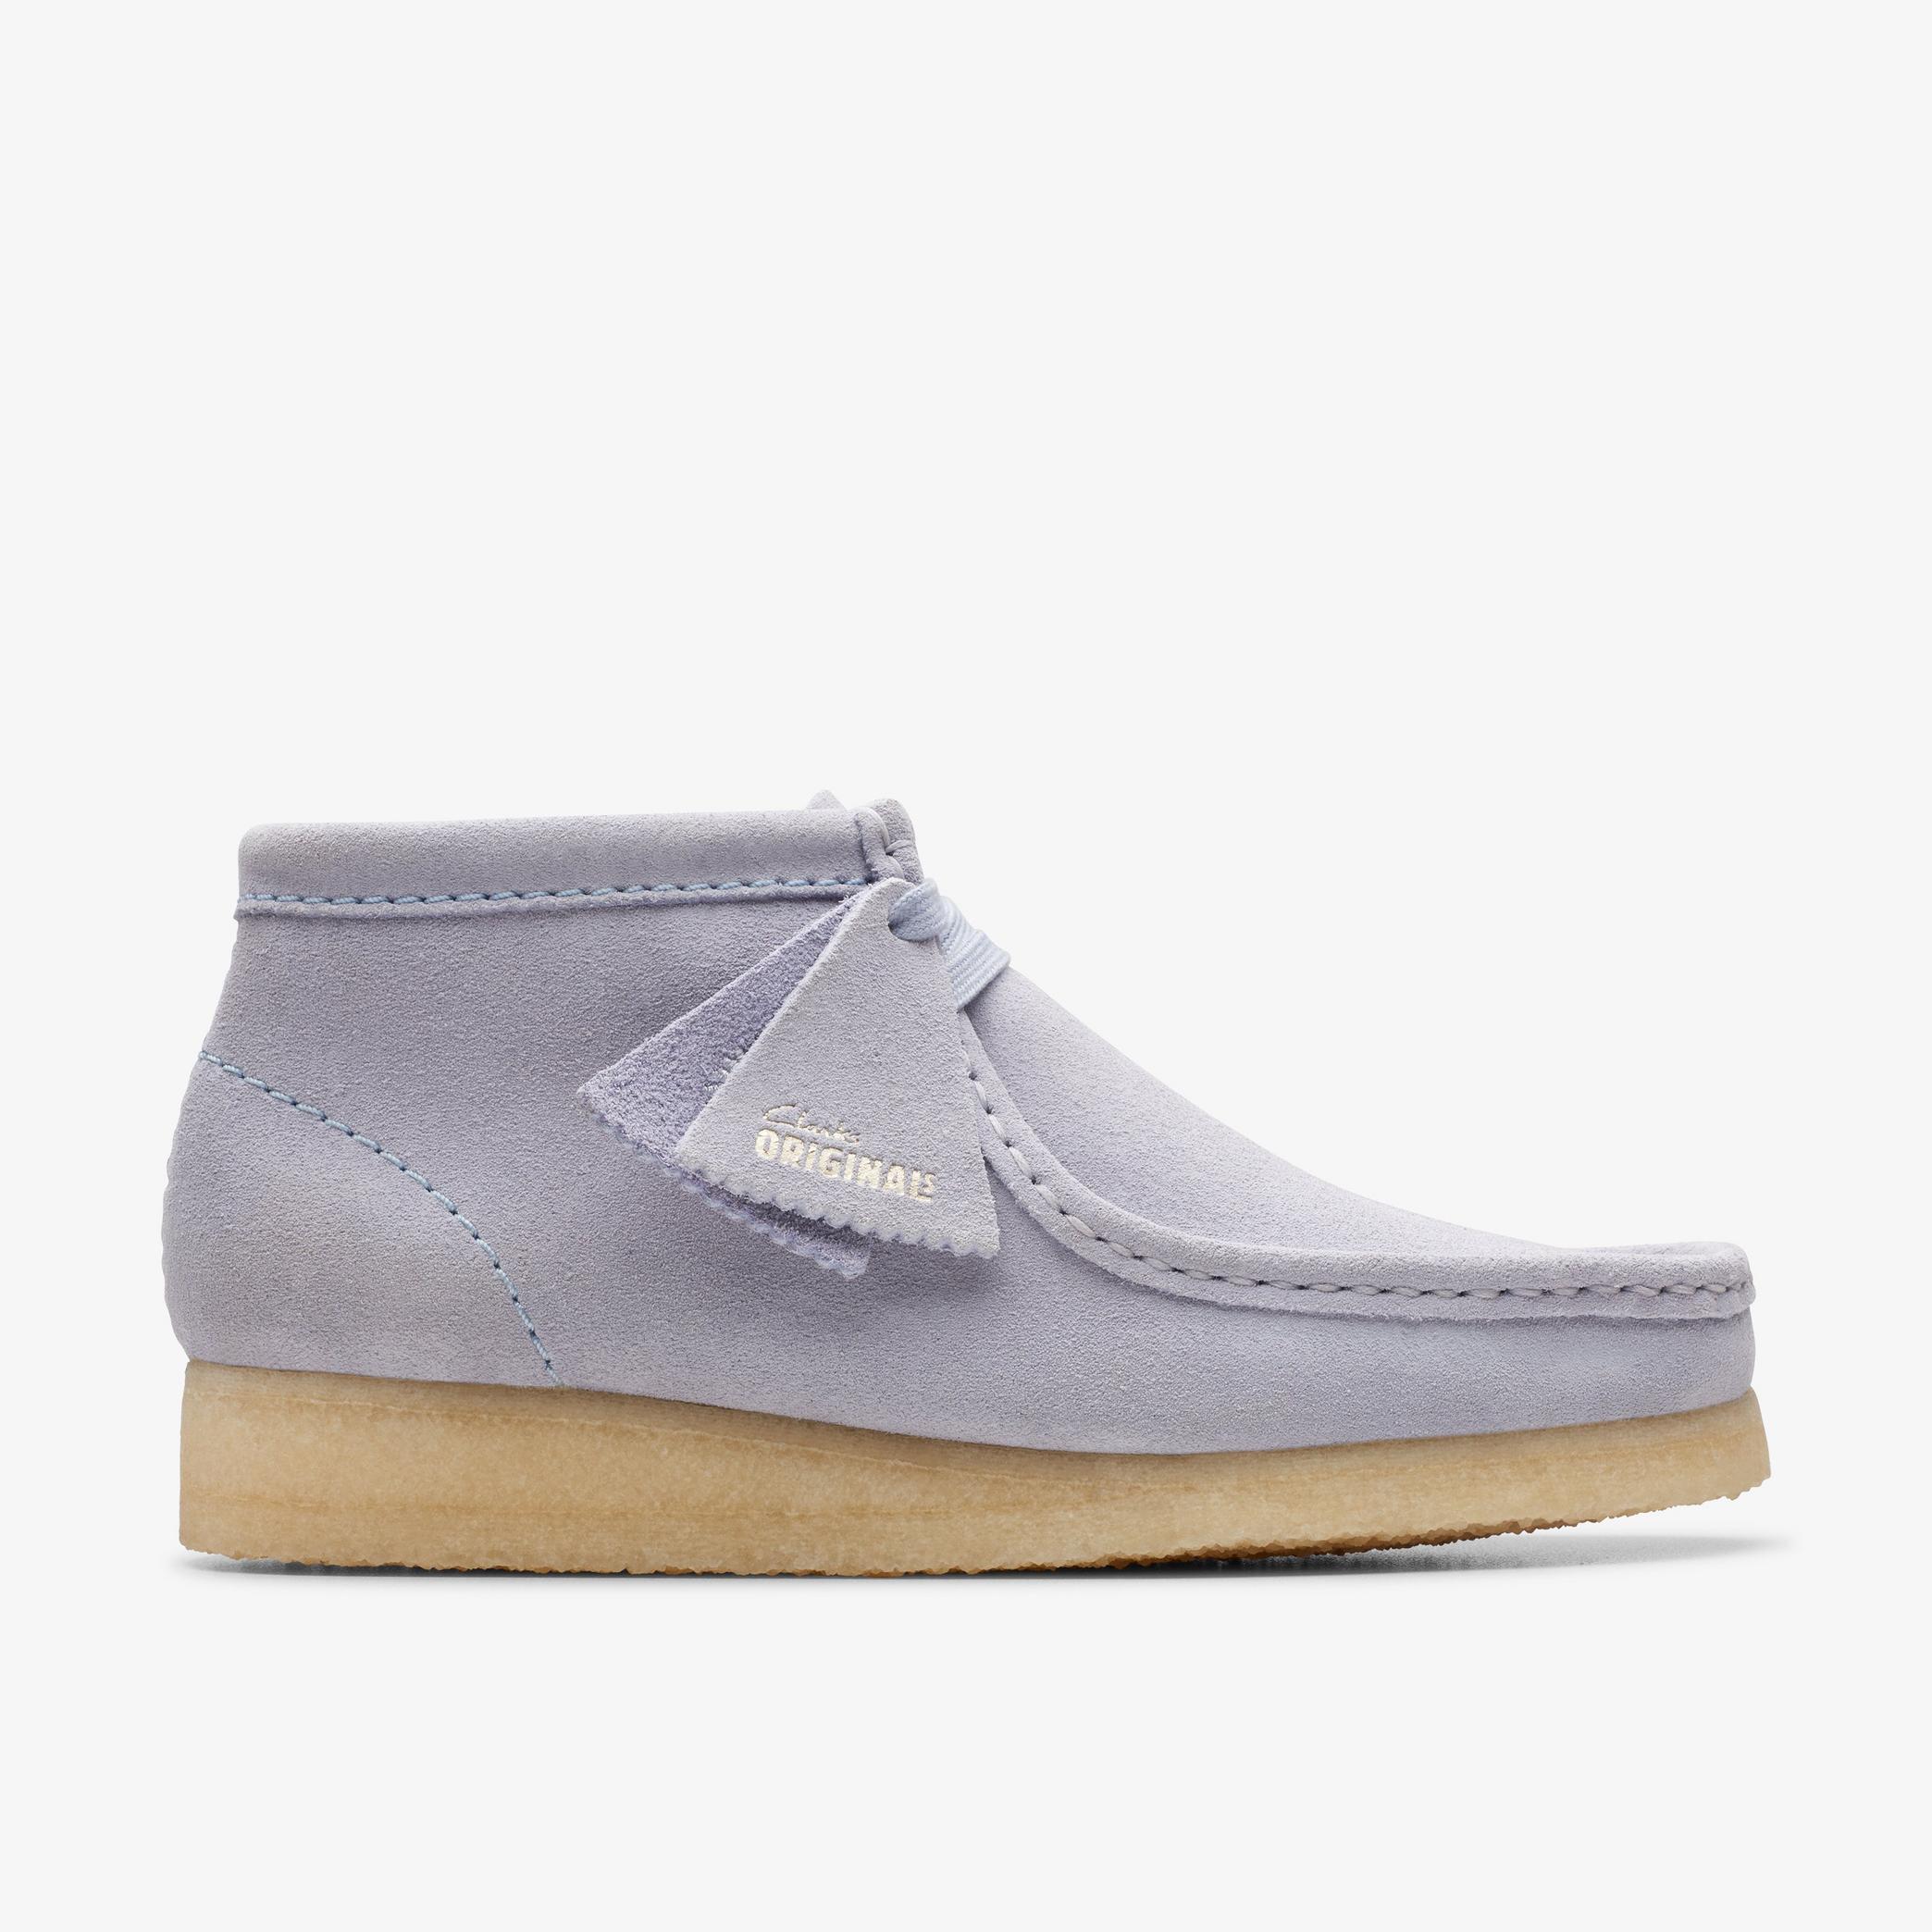 Wallabee Boot Cloud Grey Suede Wallabee, view 1 of 7